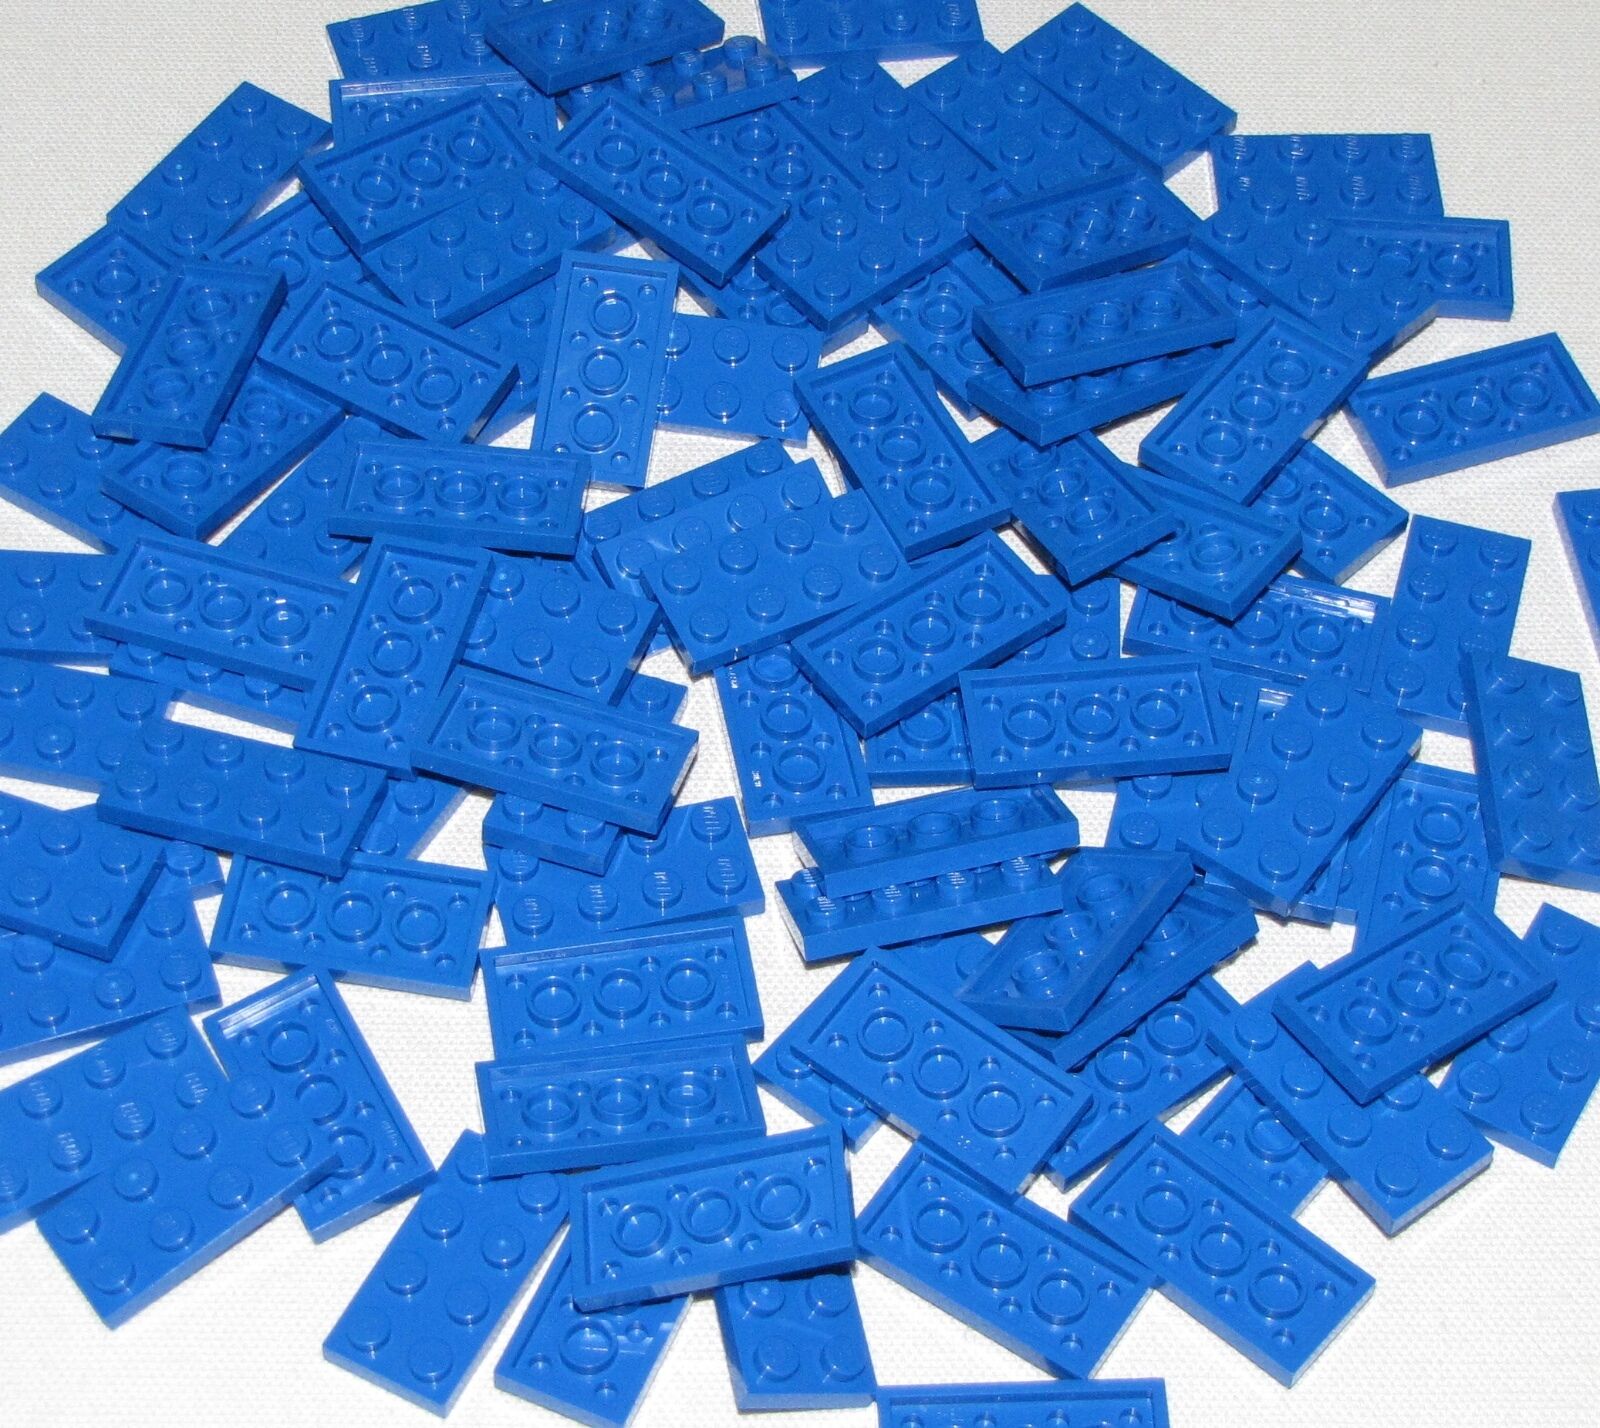 Lego Lot of 100 New Blue 2 x 4 Plates Building Blocks Pieces